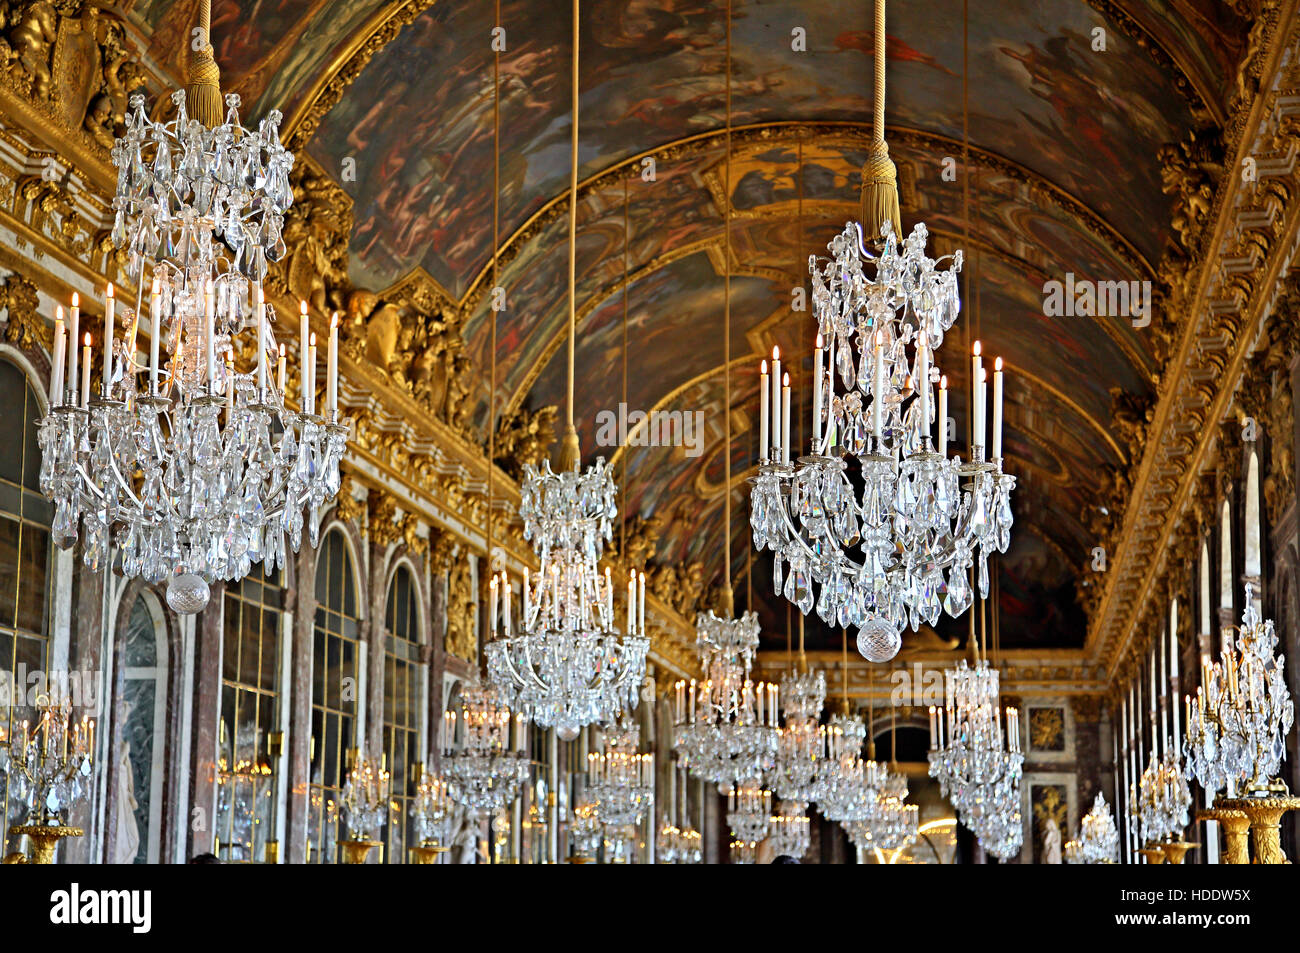 The 'Hall of Mirrors' in the Palace of Versailles, France. Stock Photo